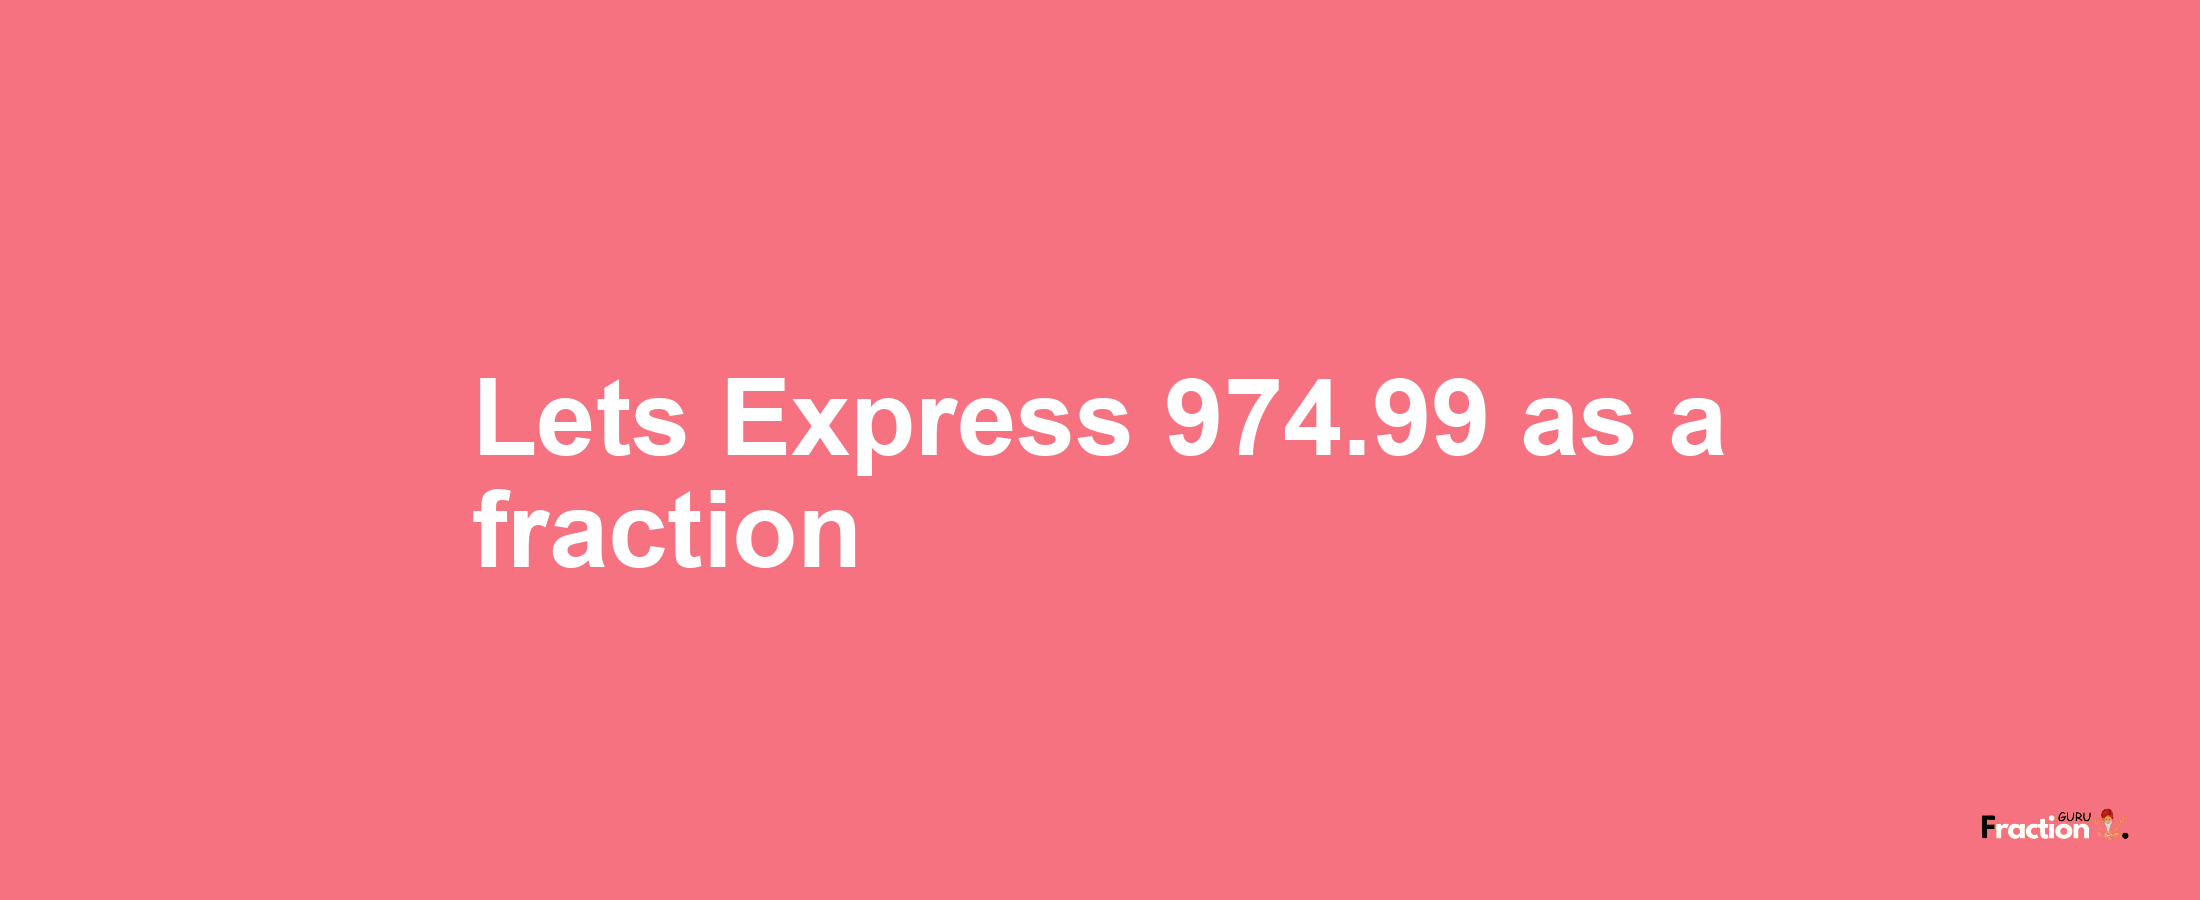 Lets Express 974.99 as afraction